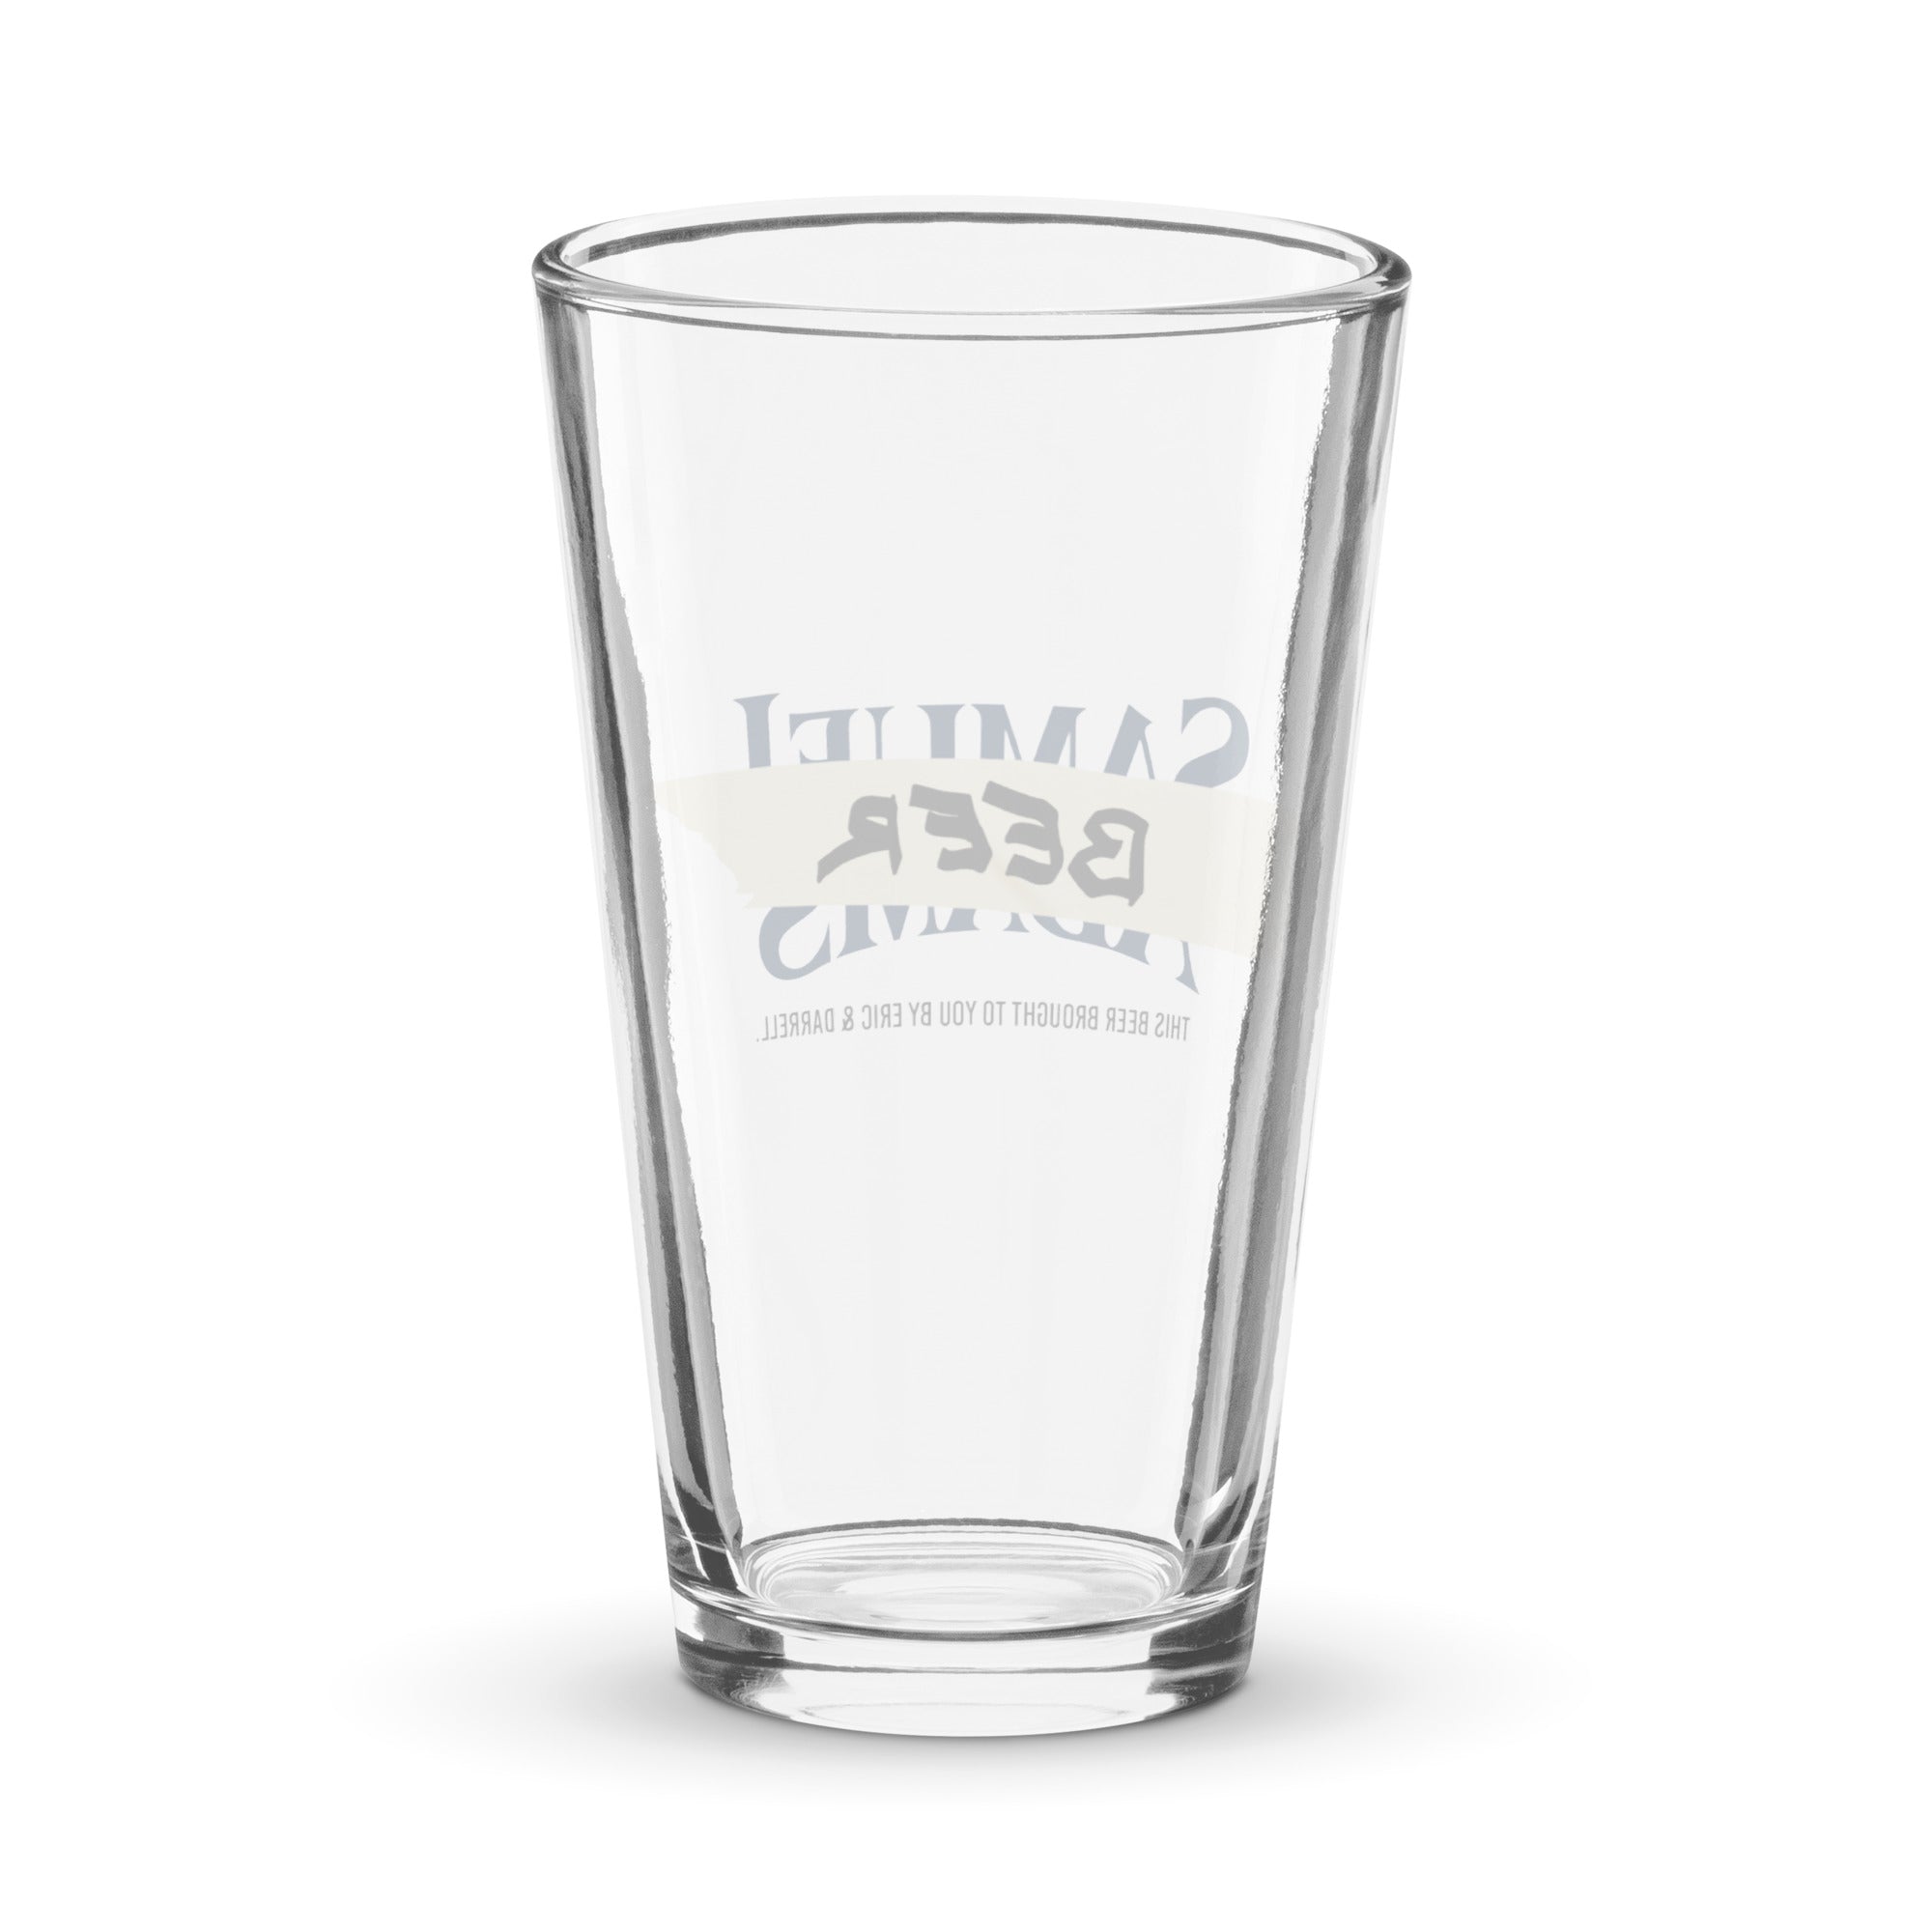 "Greeked" Beer Glass - The Boston